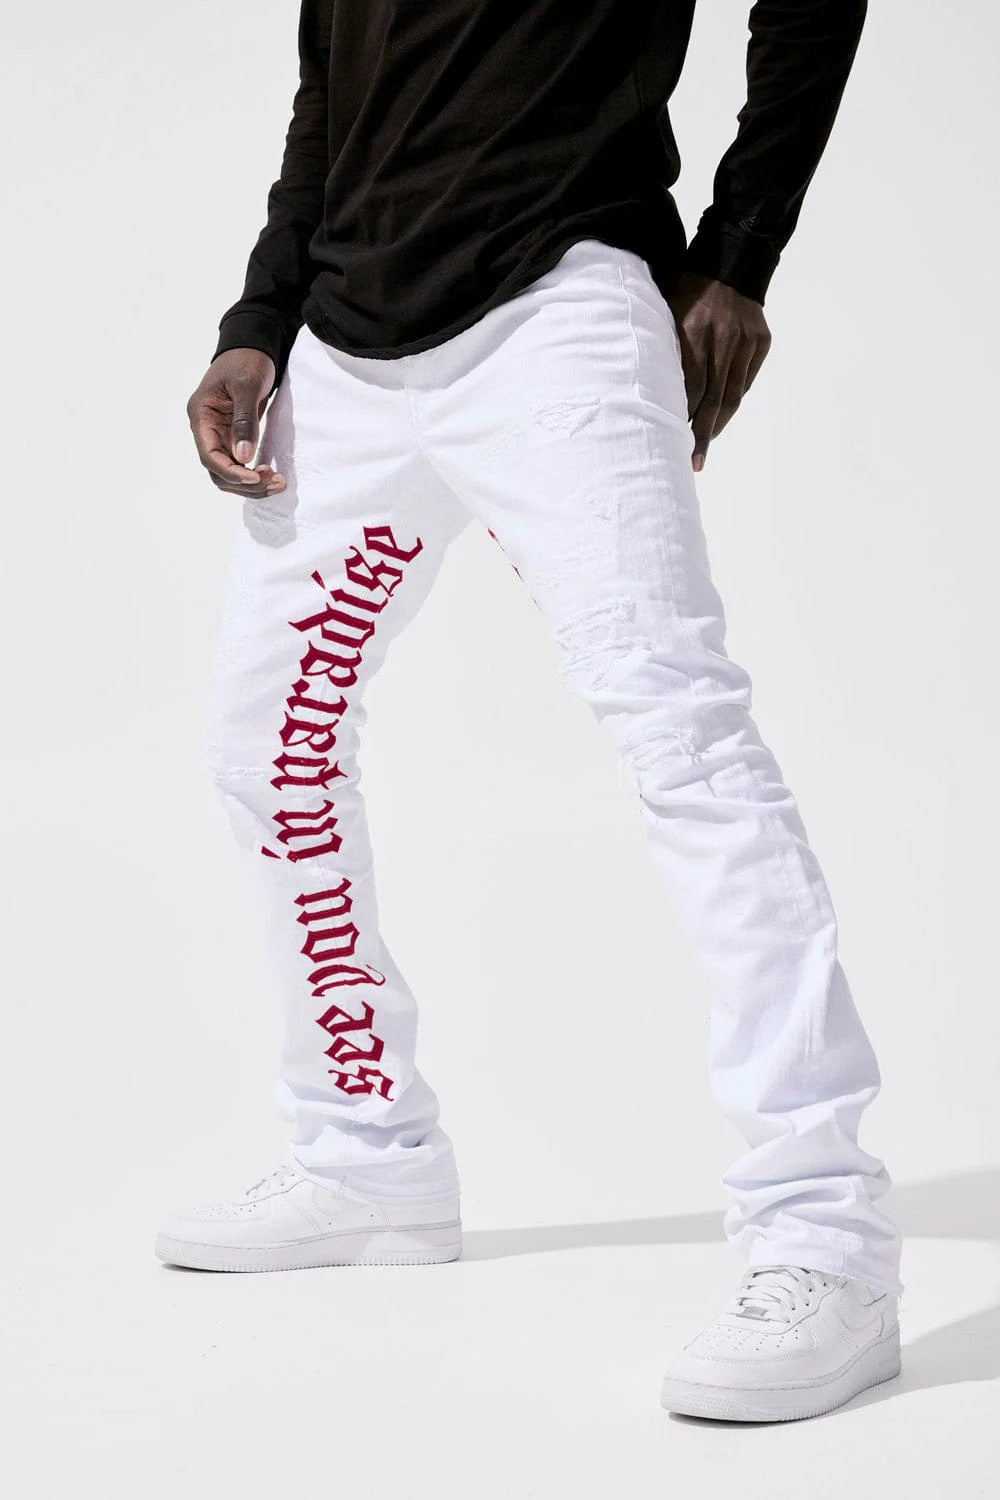 Martin Stacked - See You In Paradise Denim Jeans - White